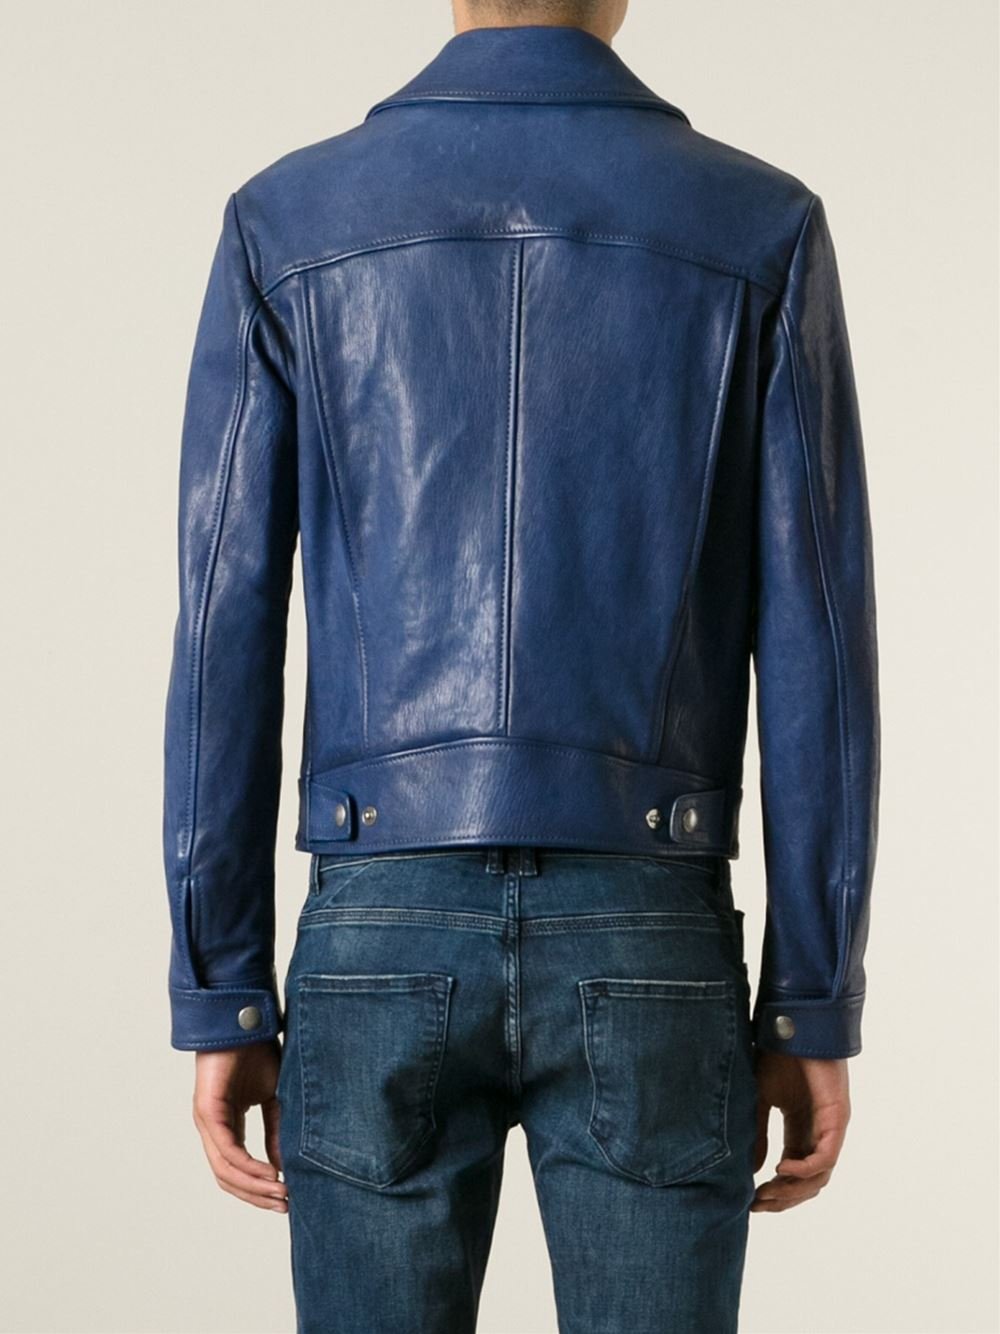 Tom Ford Zipped Jacket in Blue for Men - Lyst